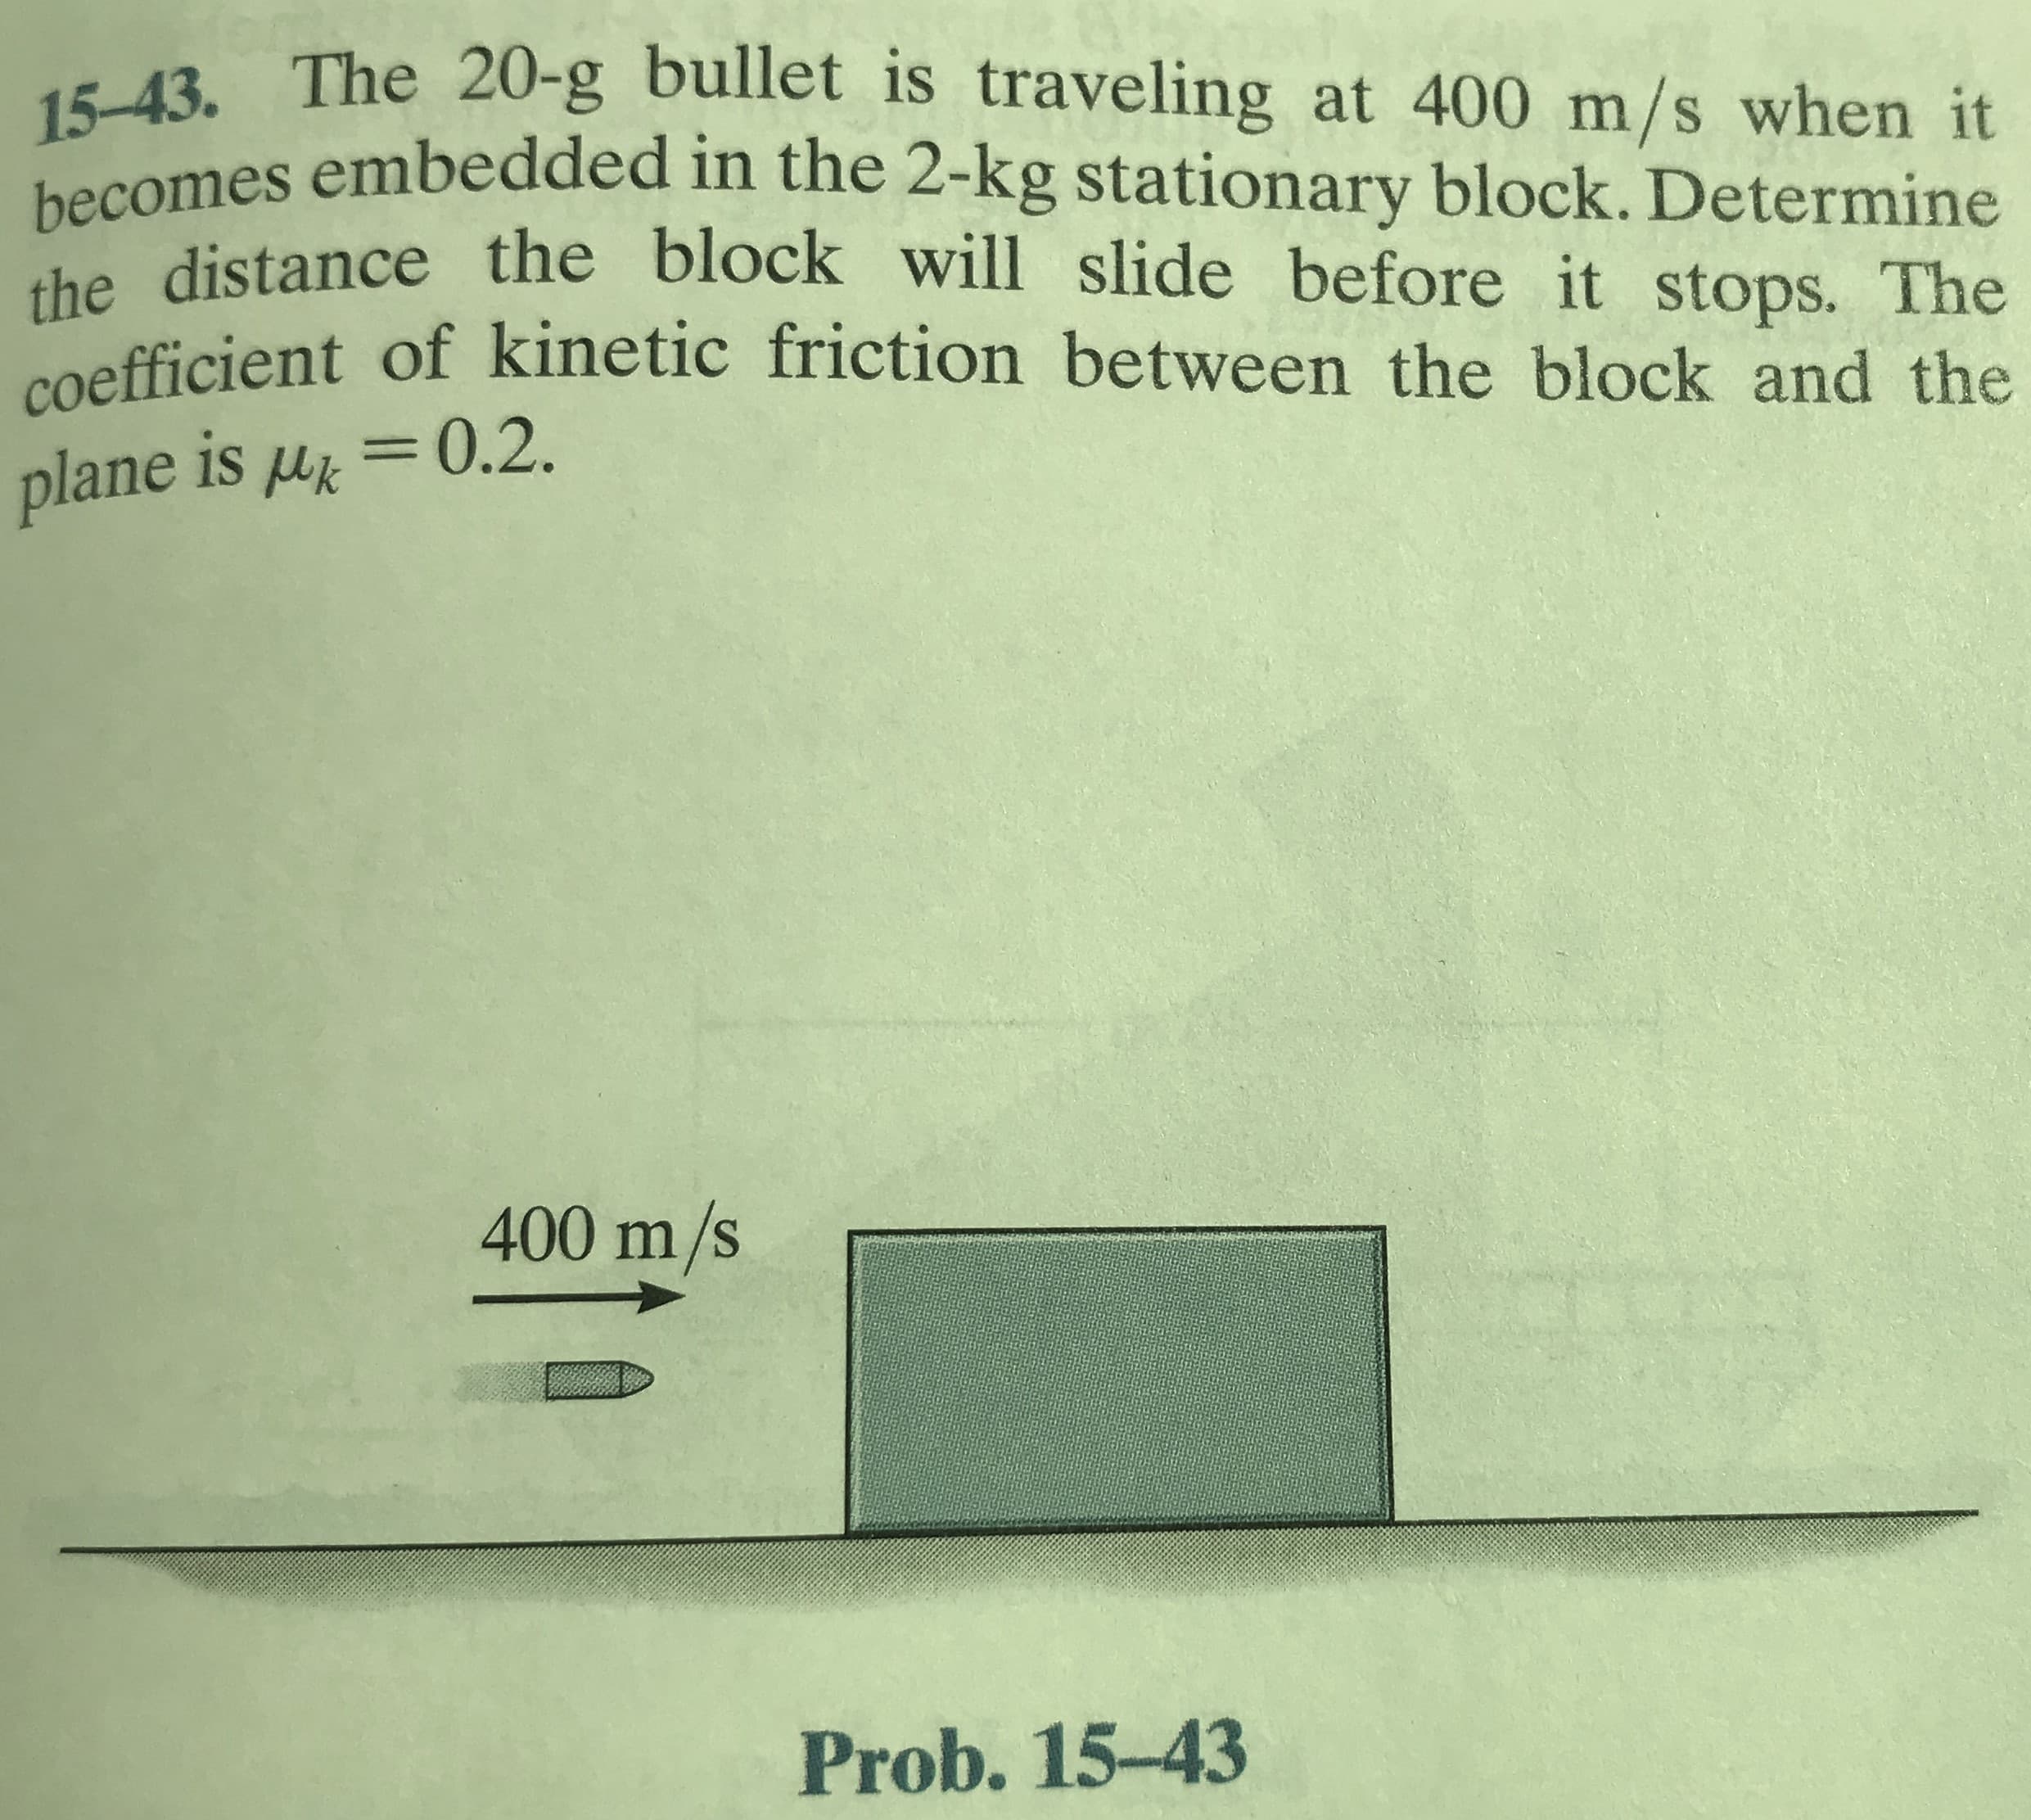 15-43. The 20-g bullet is traveling at 400 m/s when it
becomes embedded in the 2-kg stationary block. Determine
he distance the block will slide before it stops. The
coefficient of kinetic friction between the block and the
plane is u = 0.2.
400 m/s
Prob. 15-43
